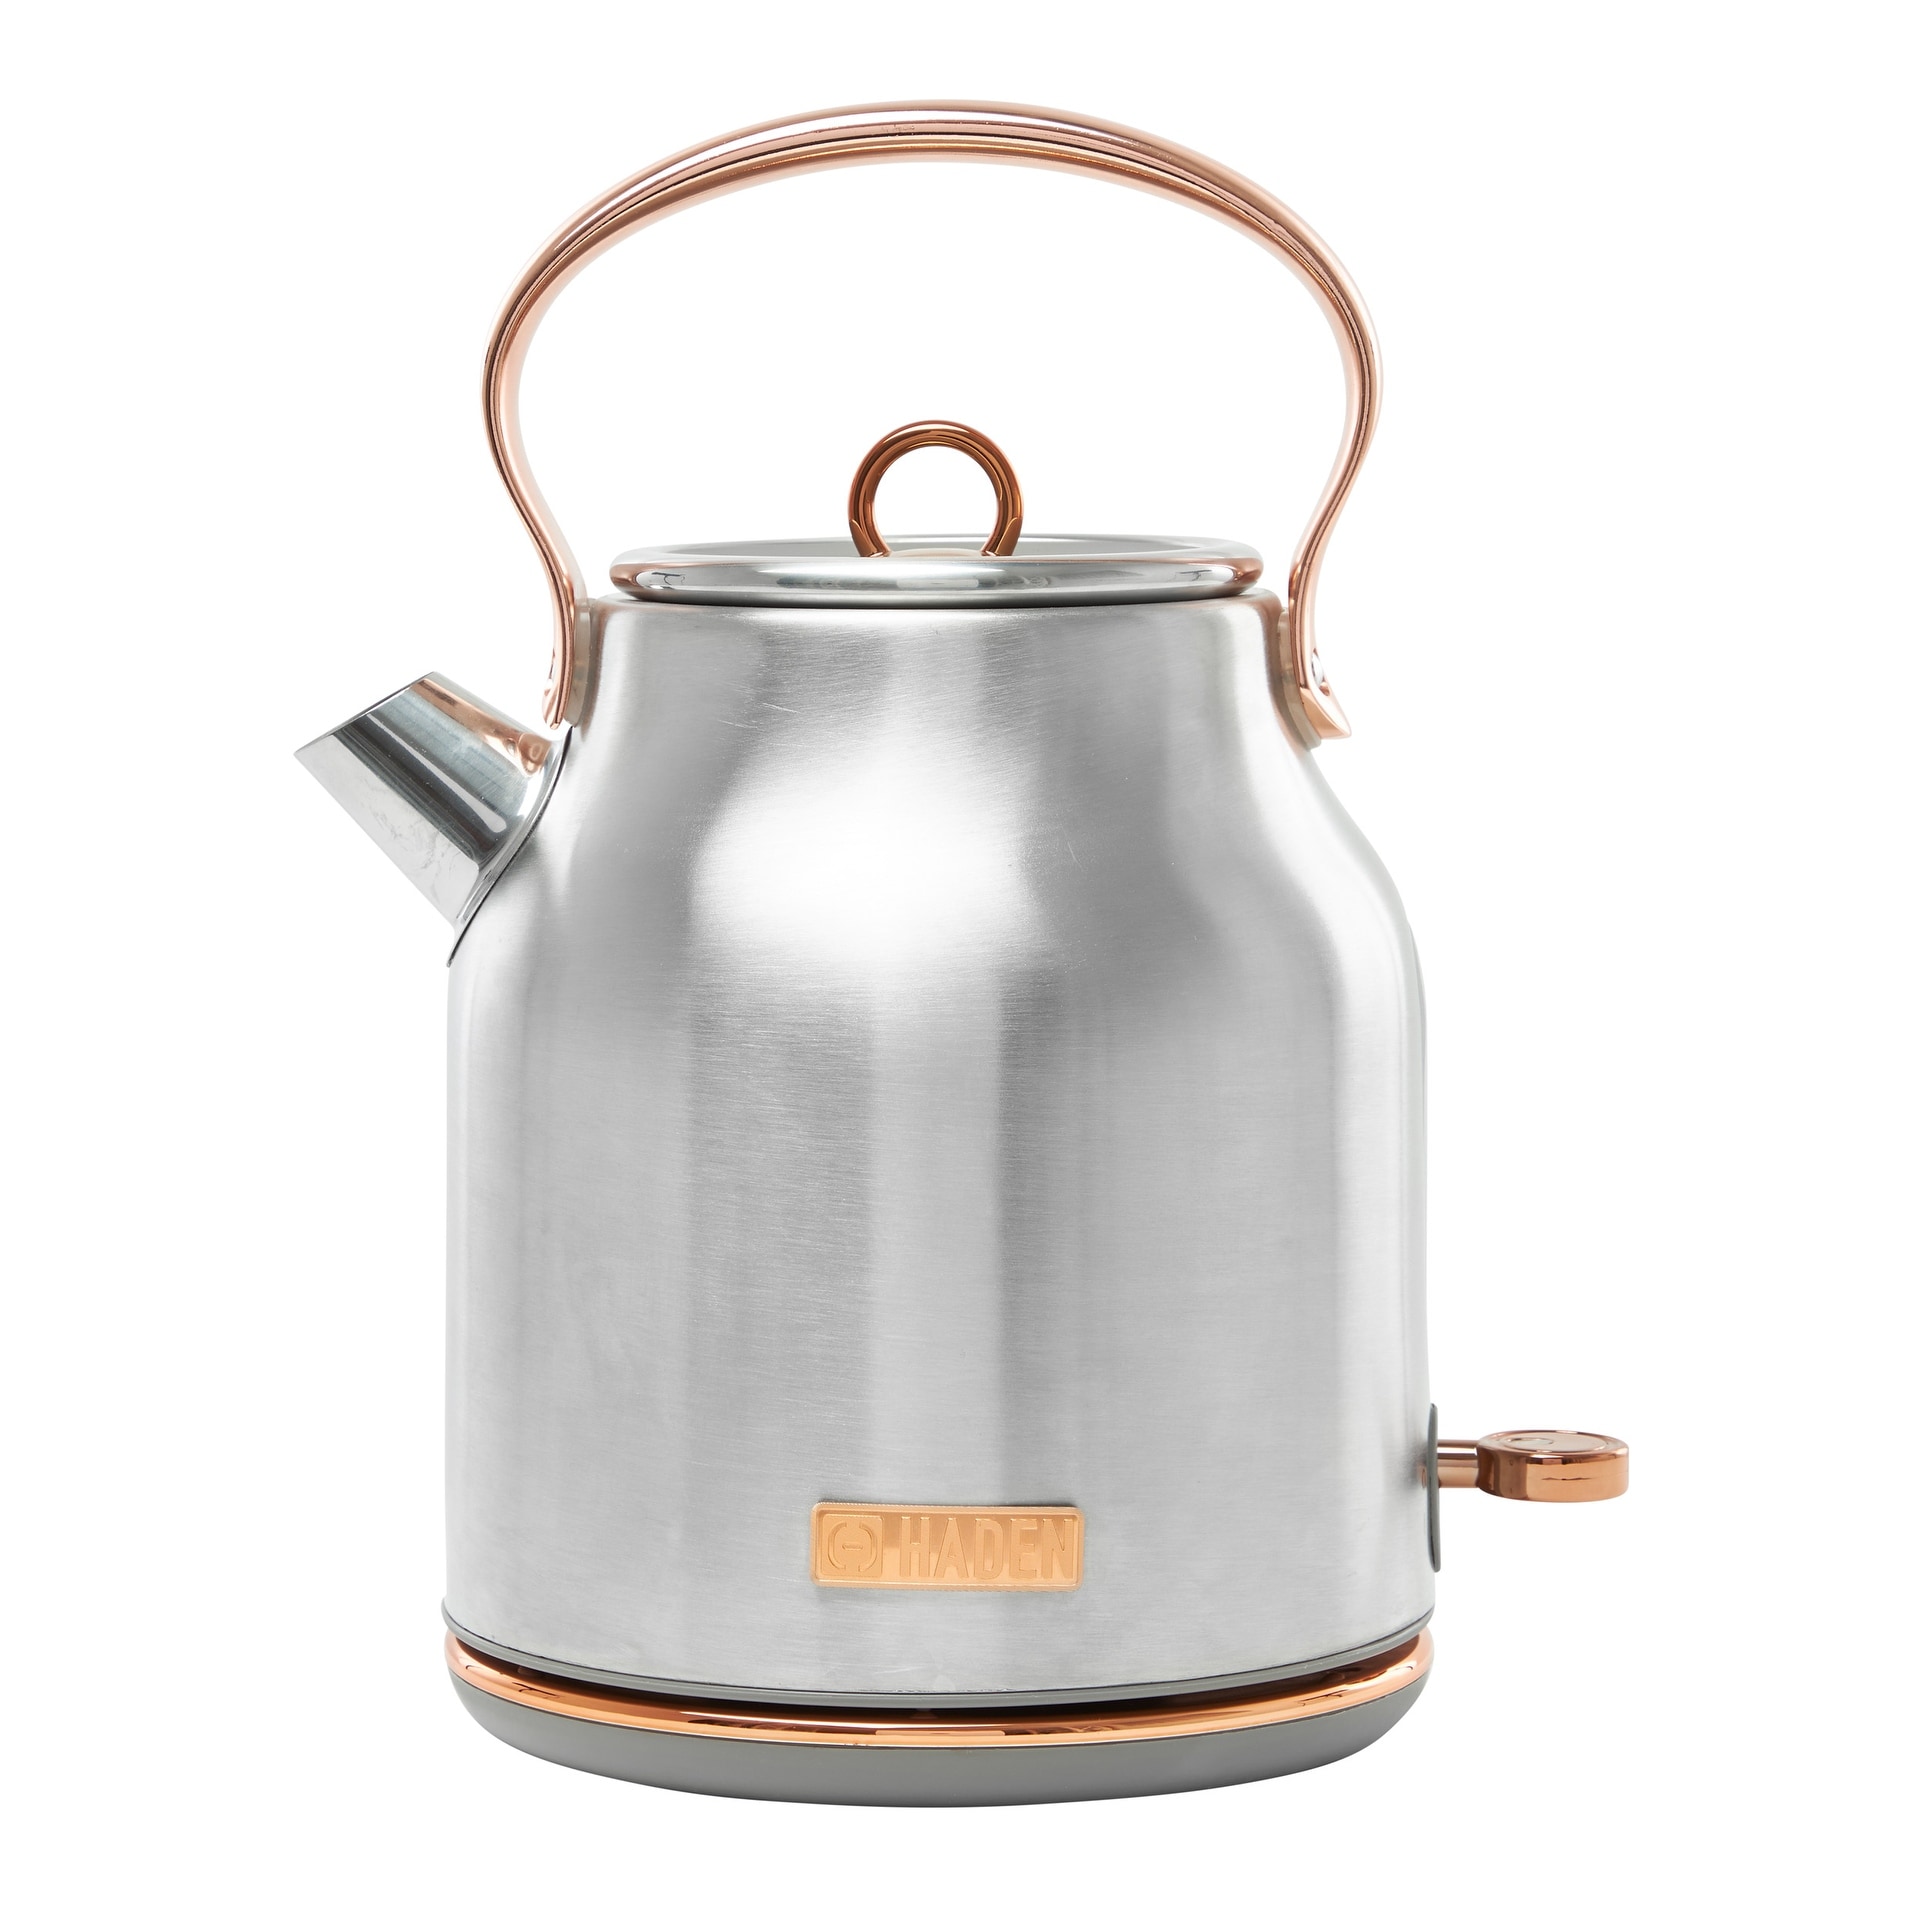 https://ak1.ostkcdn.com/images/products/is/images/direct/e65e64dc37af5e196b6c796dce83c641bbee6f20/Haden-Heritage-1.7-Liter-Stainless-Steel-Electric-Tea-Kettle.jpg